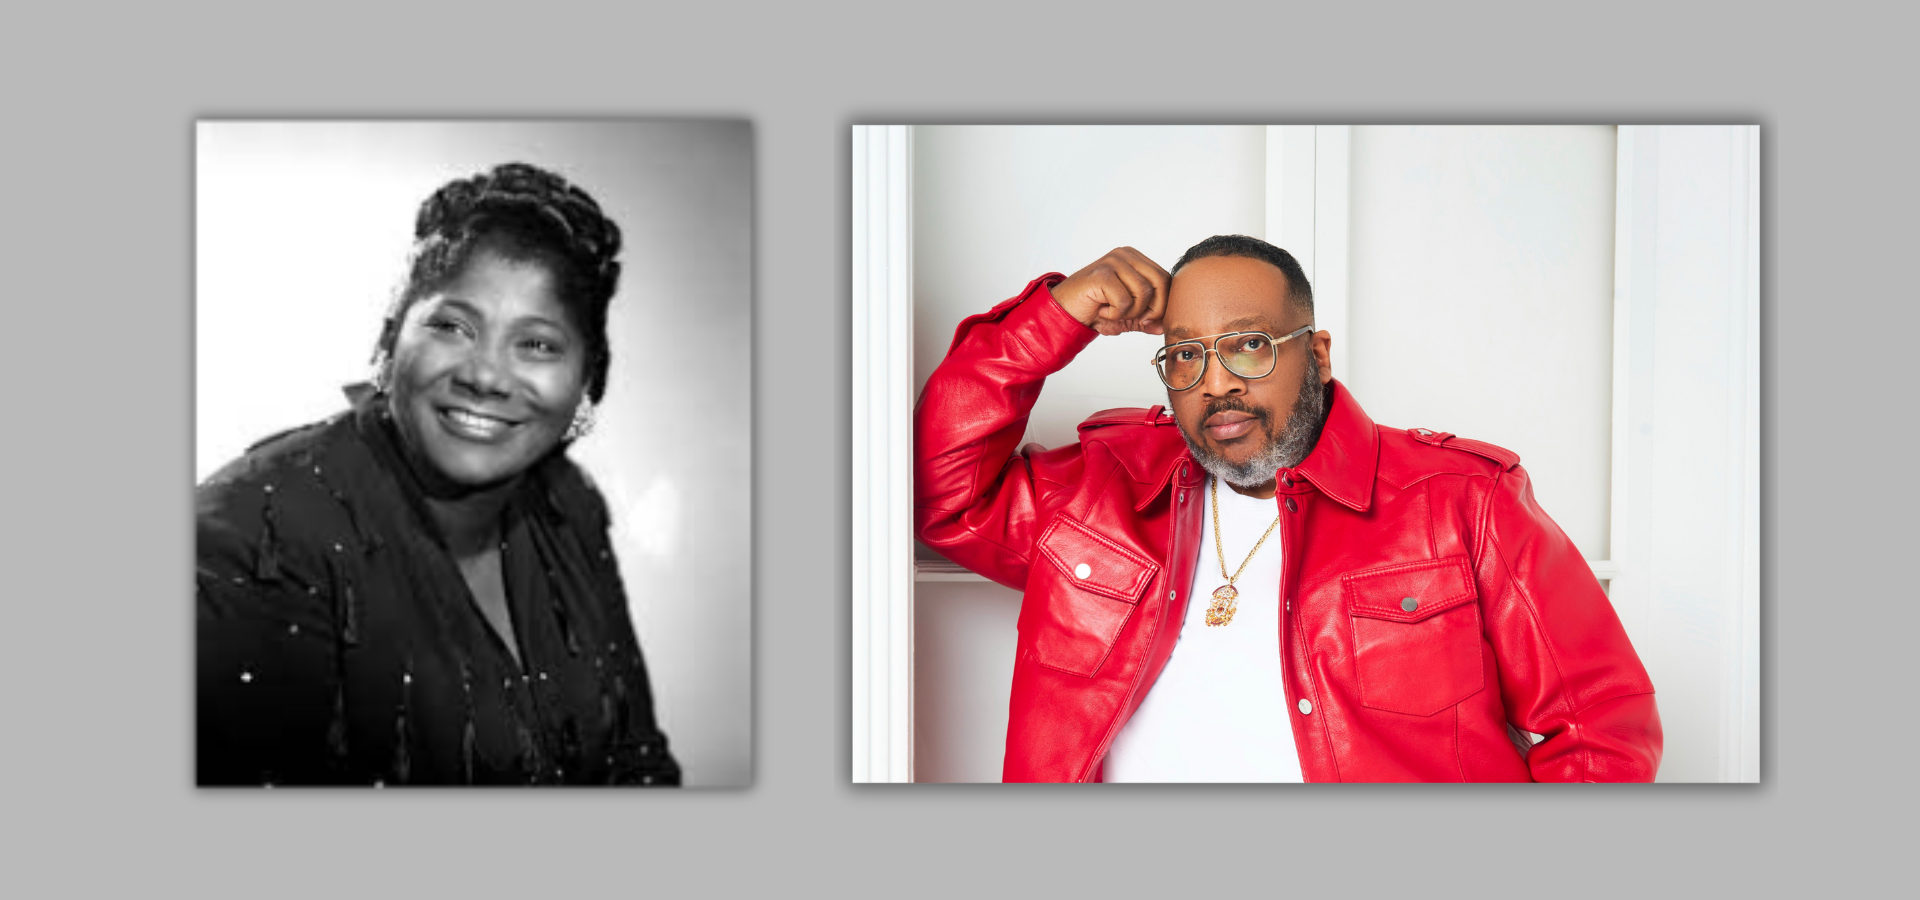 Mahalia Jackson, Marvin Sapp & More Inductees For The Black Music and Entertainment Walk Of Fame